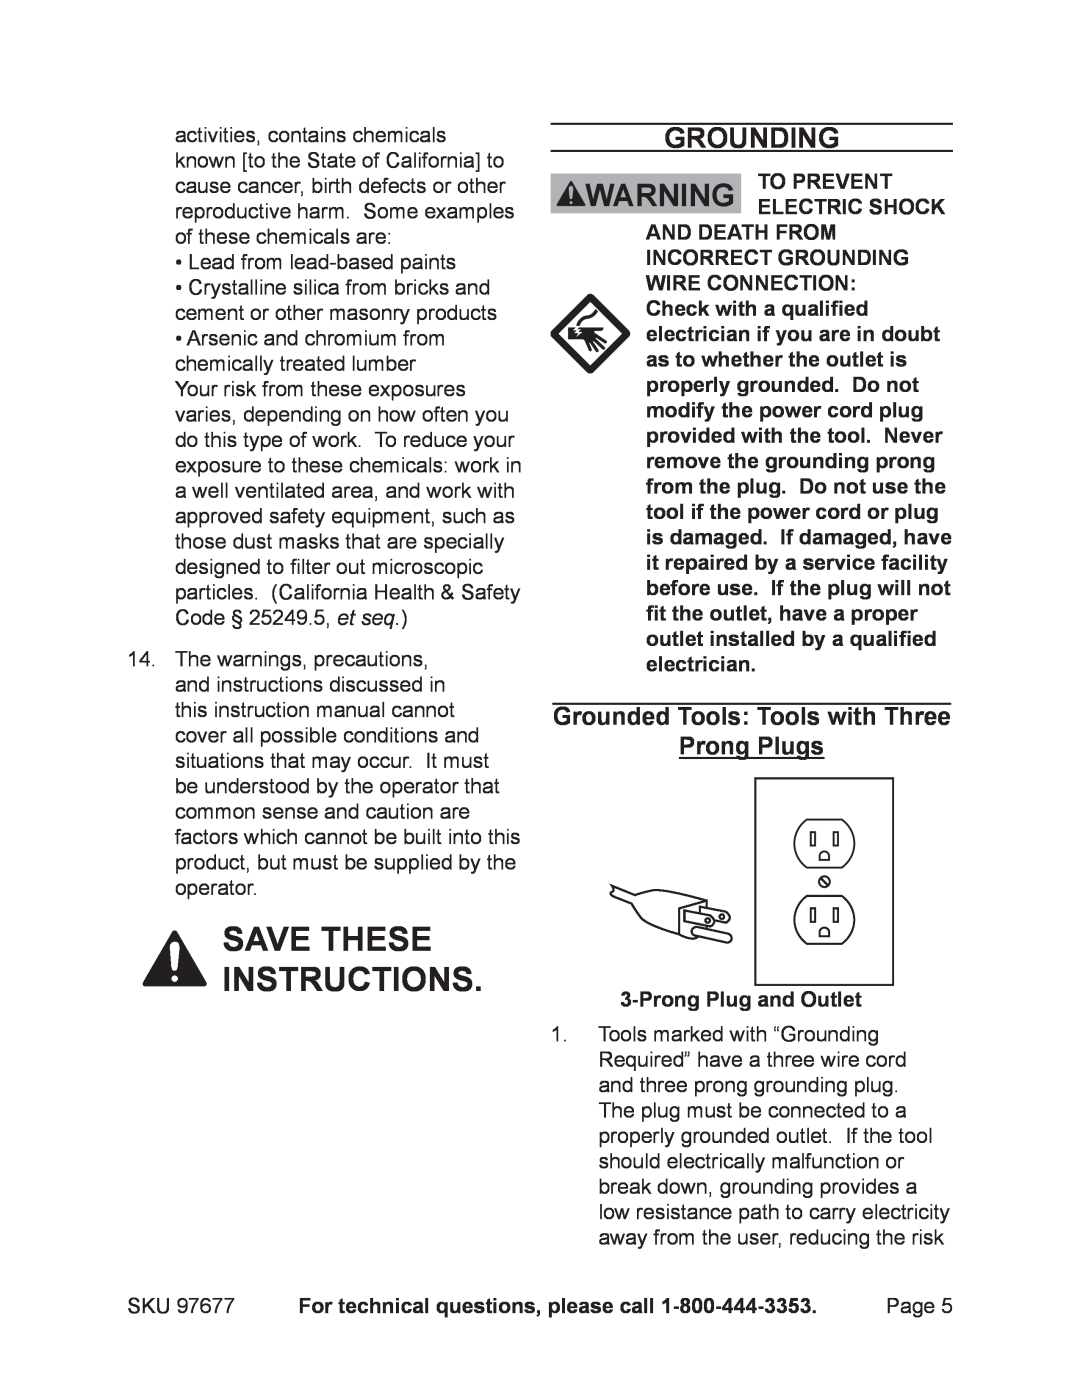 Chicago Electric 97677 manual Save these instructions, Grounding 